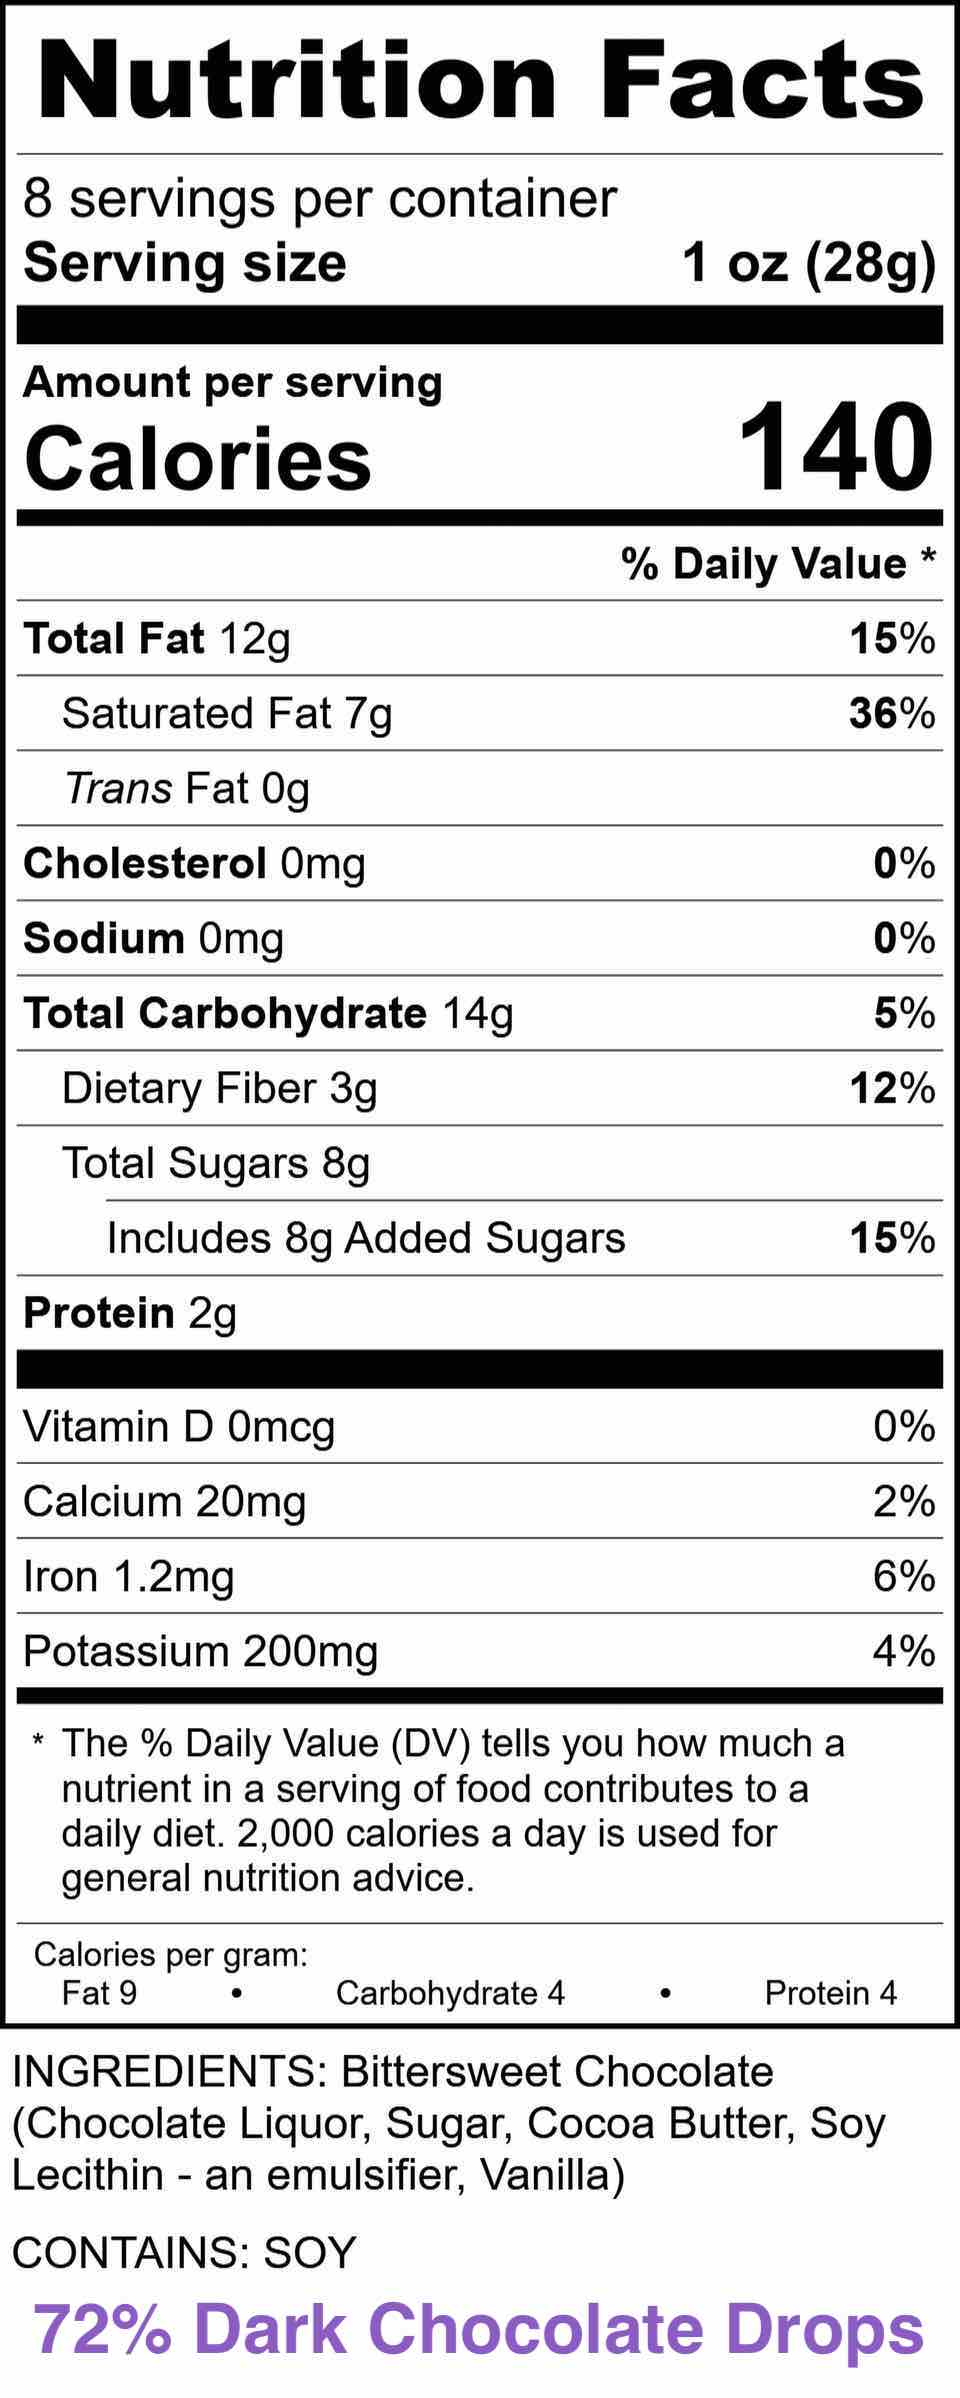 Nutrition Facts - 72% Dark Chocolate Drops
INGREDIENTS: Bittersweet Chocolate (Chocolate Liquor, Sugar, Cocoa Butter, Soy Lecithin-an emulsifier. Vanilla)

CONTAINS: SOY

Serving size 1 oz (28g)
Amount per serving % Daily Value
Calories 140
Total Fat 12g 15%
Saturated Fat 7g 36%
Trans Fat 0g
Cholesterol Omg 0%
Sodium Omg 0%
Total Carbohydrate 14g 5%
Dietary Fiber 3g 12%
Total Sugars 8g 15%
Includes 8g Added Sugars
Protein 2g
Vitamin D 0mcg 0%
Calcium 20mg 2%
Iron 1.2mg 6%
Potassium 200mg 4%
Calories per gram: Fat 9, Carbohydrate 4, Protein 4
